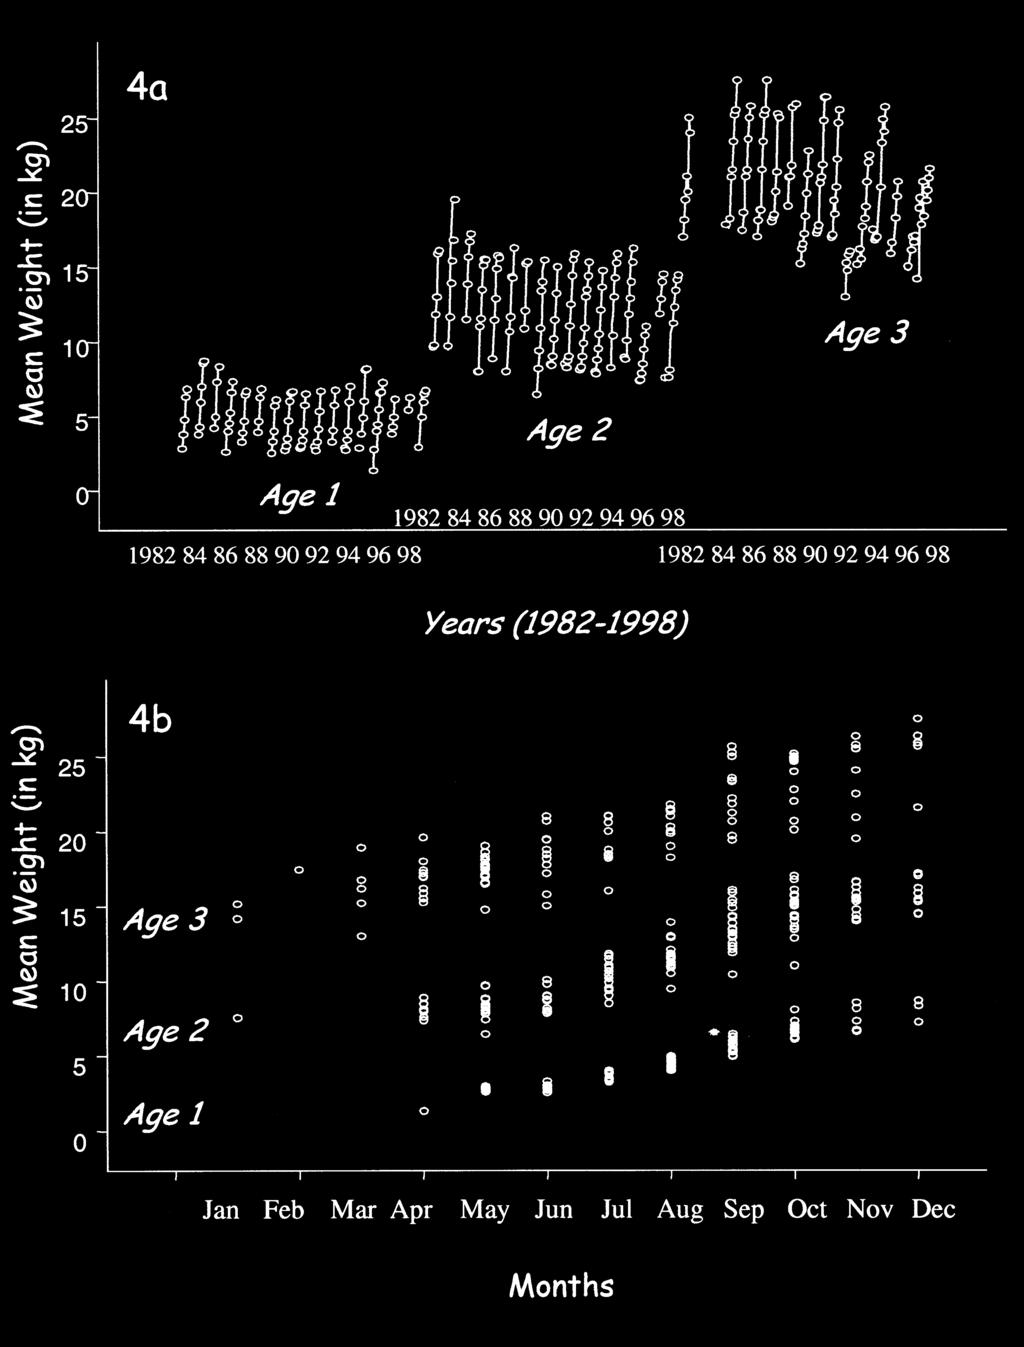 Variation in the historical trap catches (Fig.